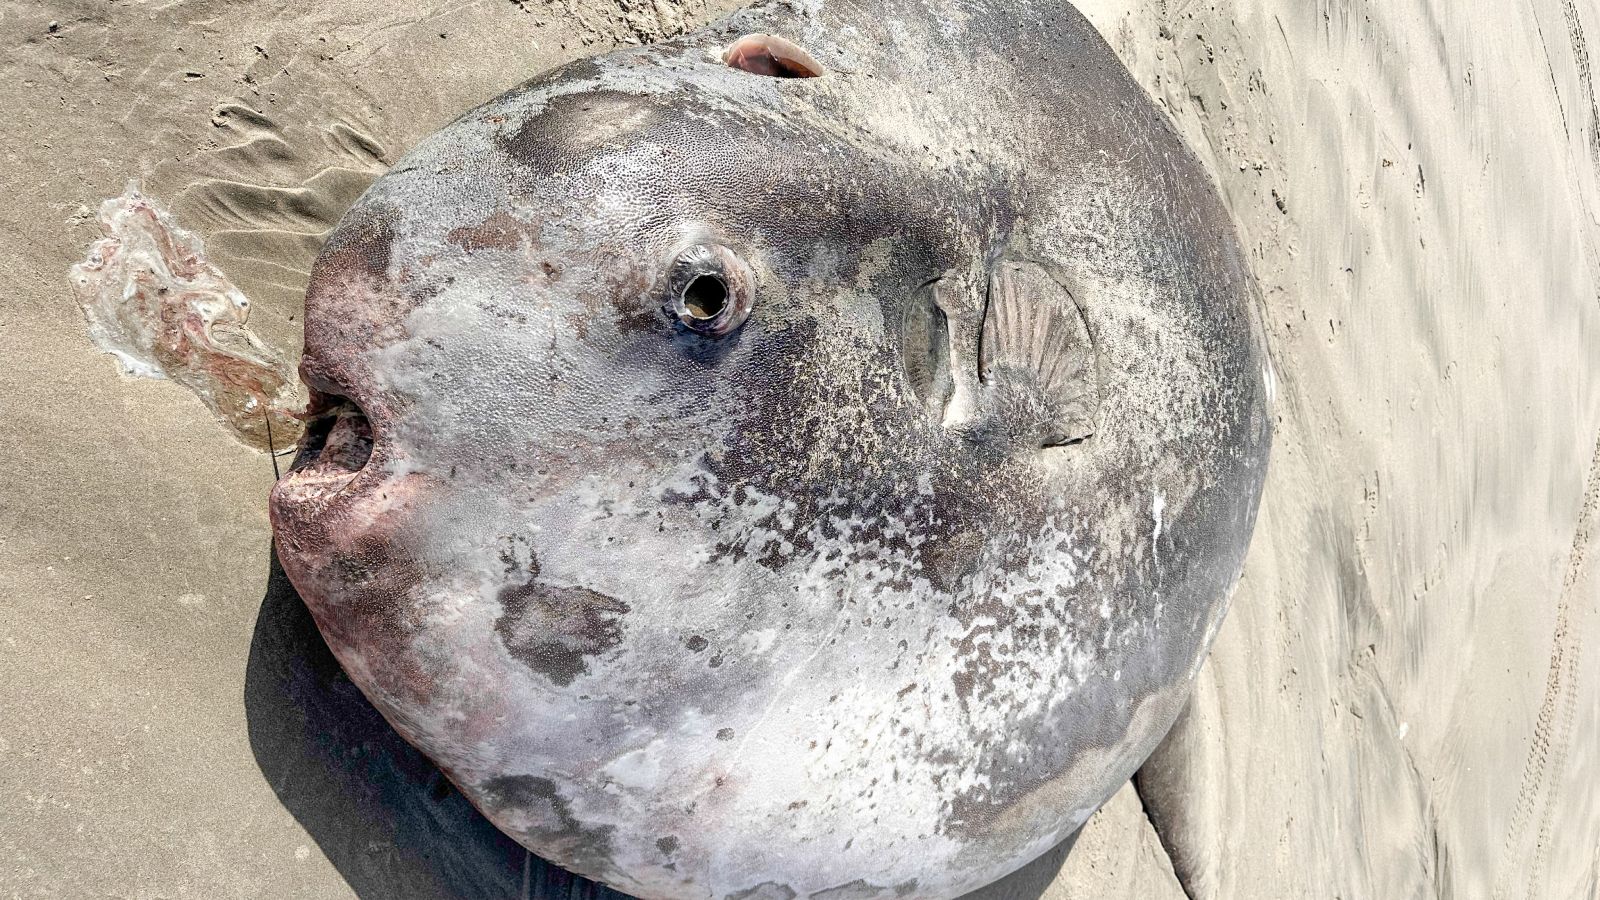 Gigantic sunfish that washed up on Oregon beach could…